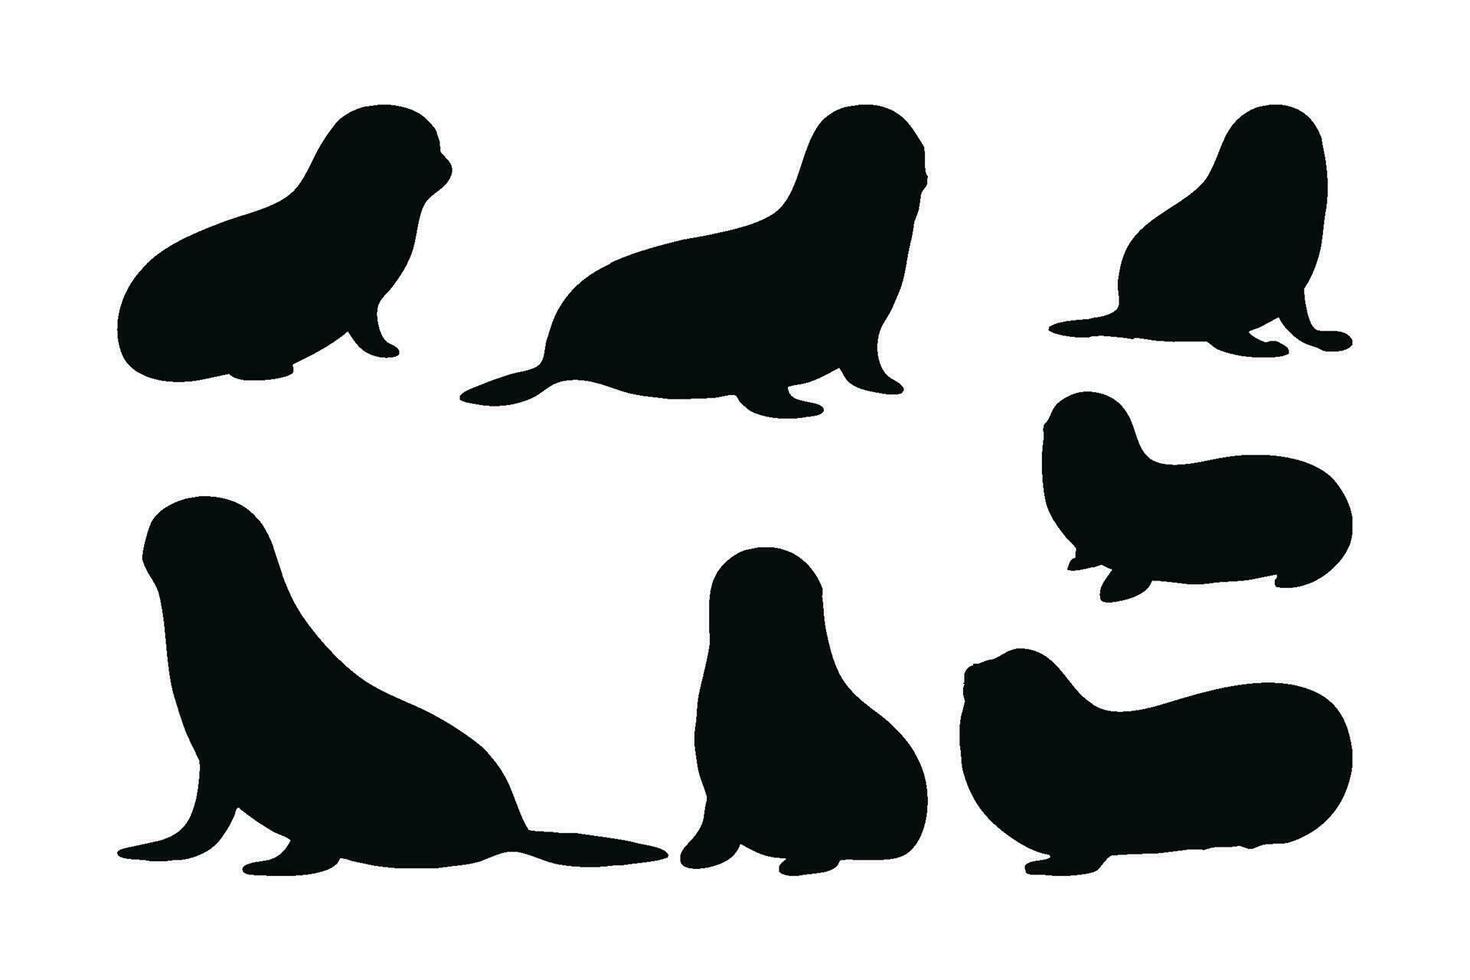 Seals crawling in different positions, silhouette set vector. Adult seals silhouette collection on a white background. Beautiful sea creatures like seals and sea lions full body silhouette bundles. vector